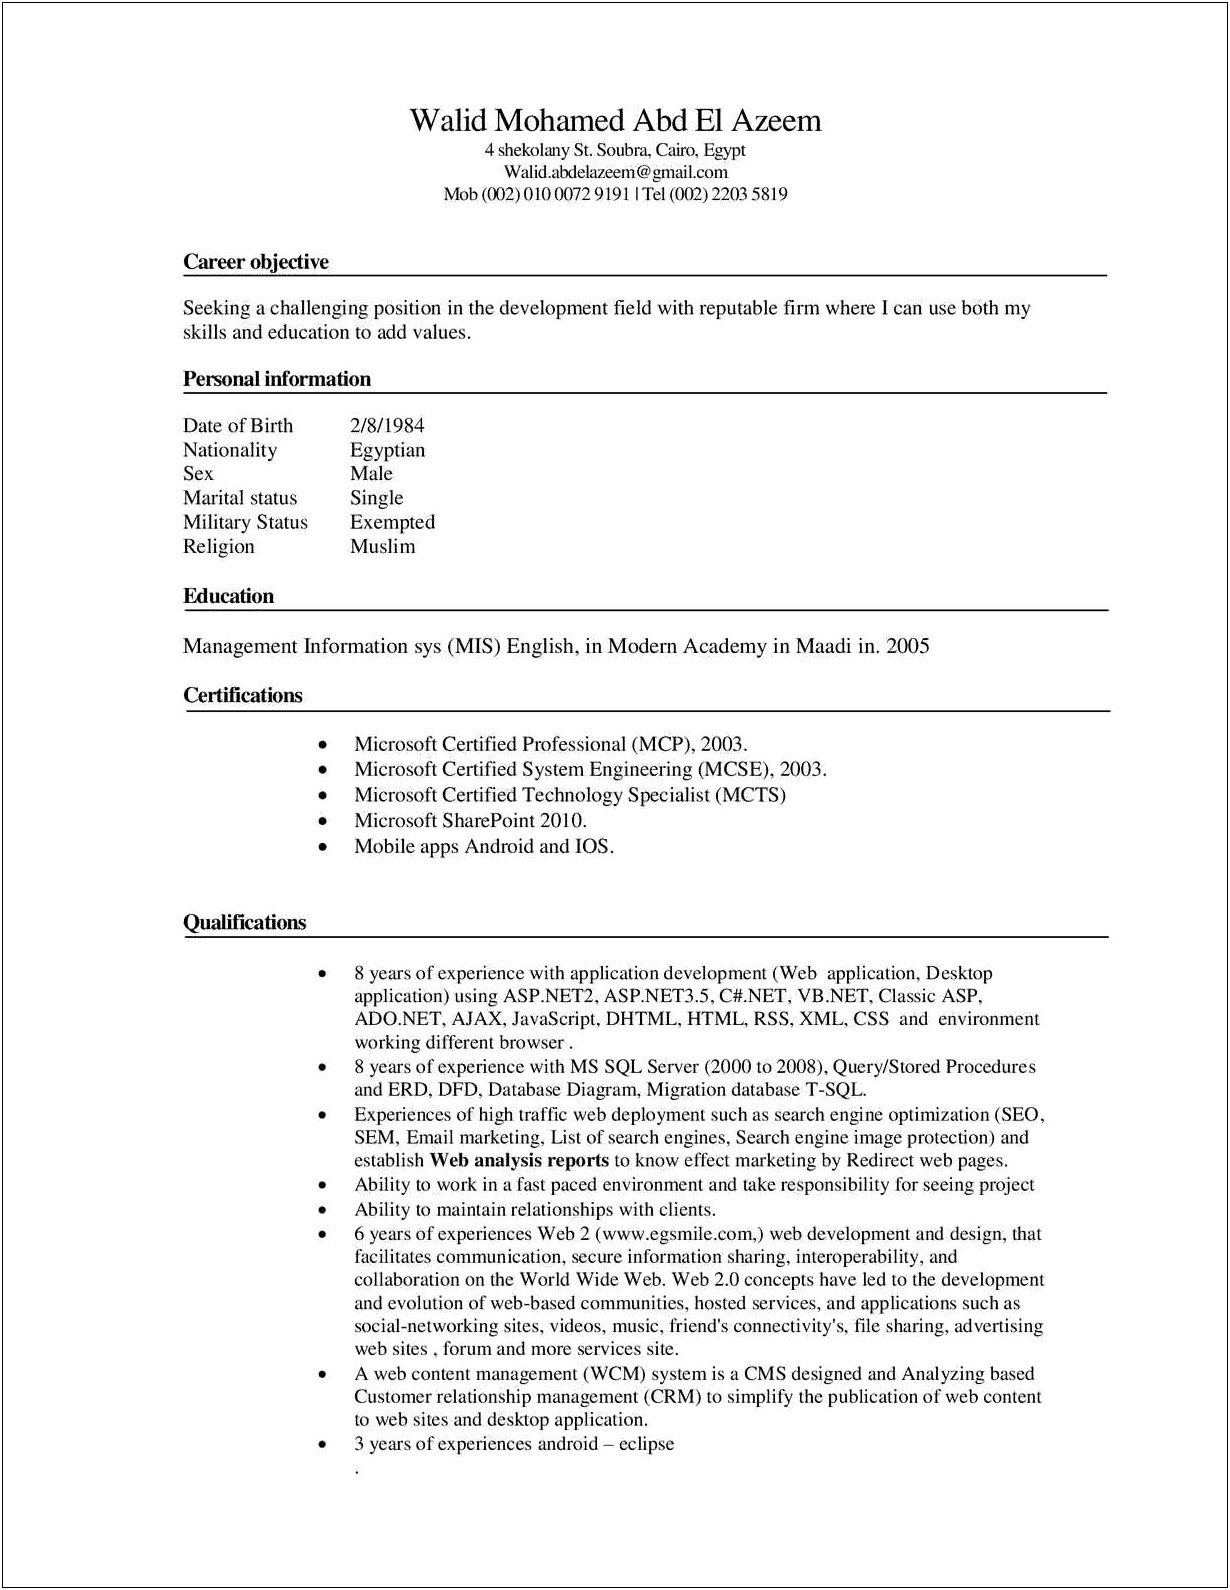 Resume Objective For Management Information Systems